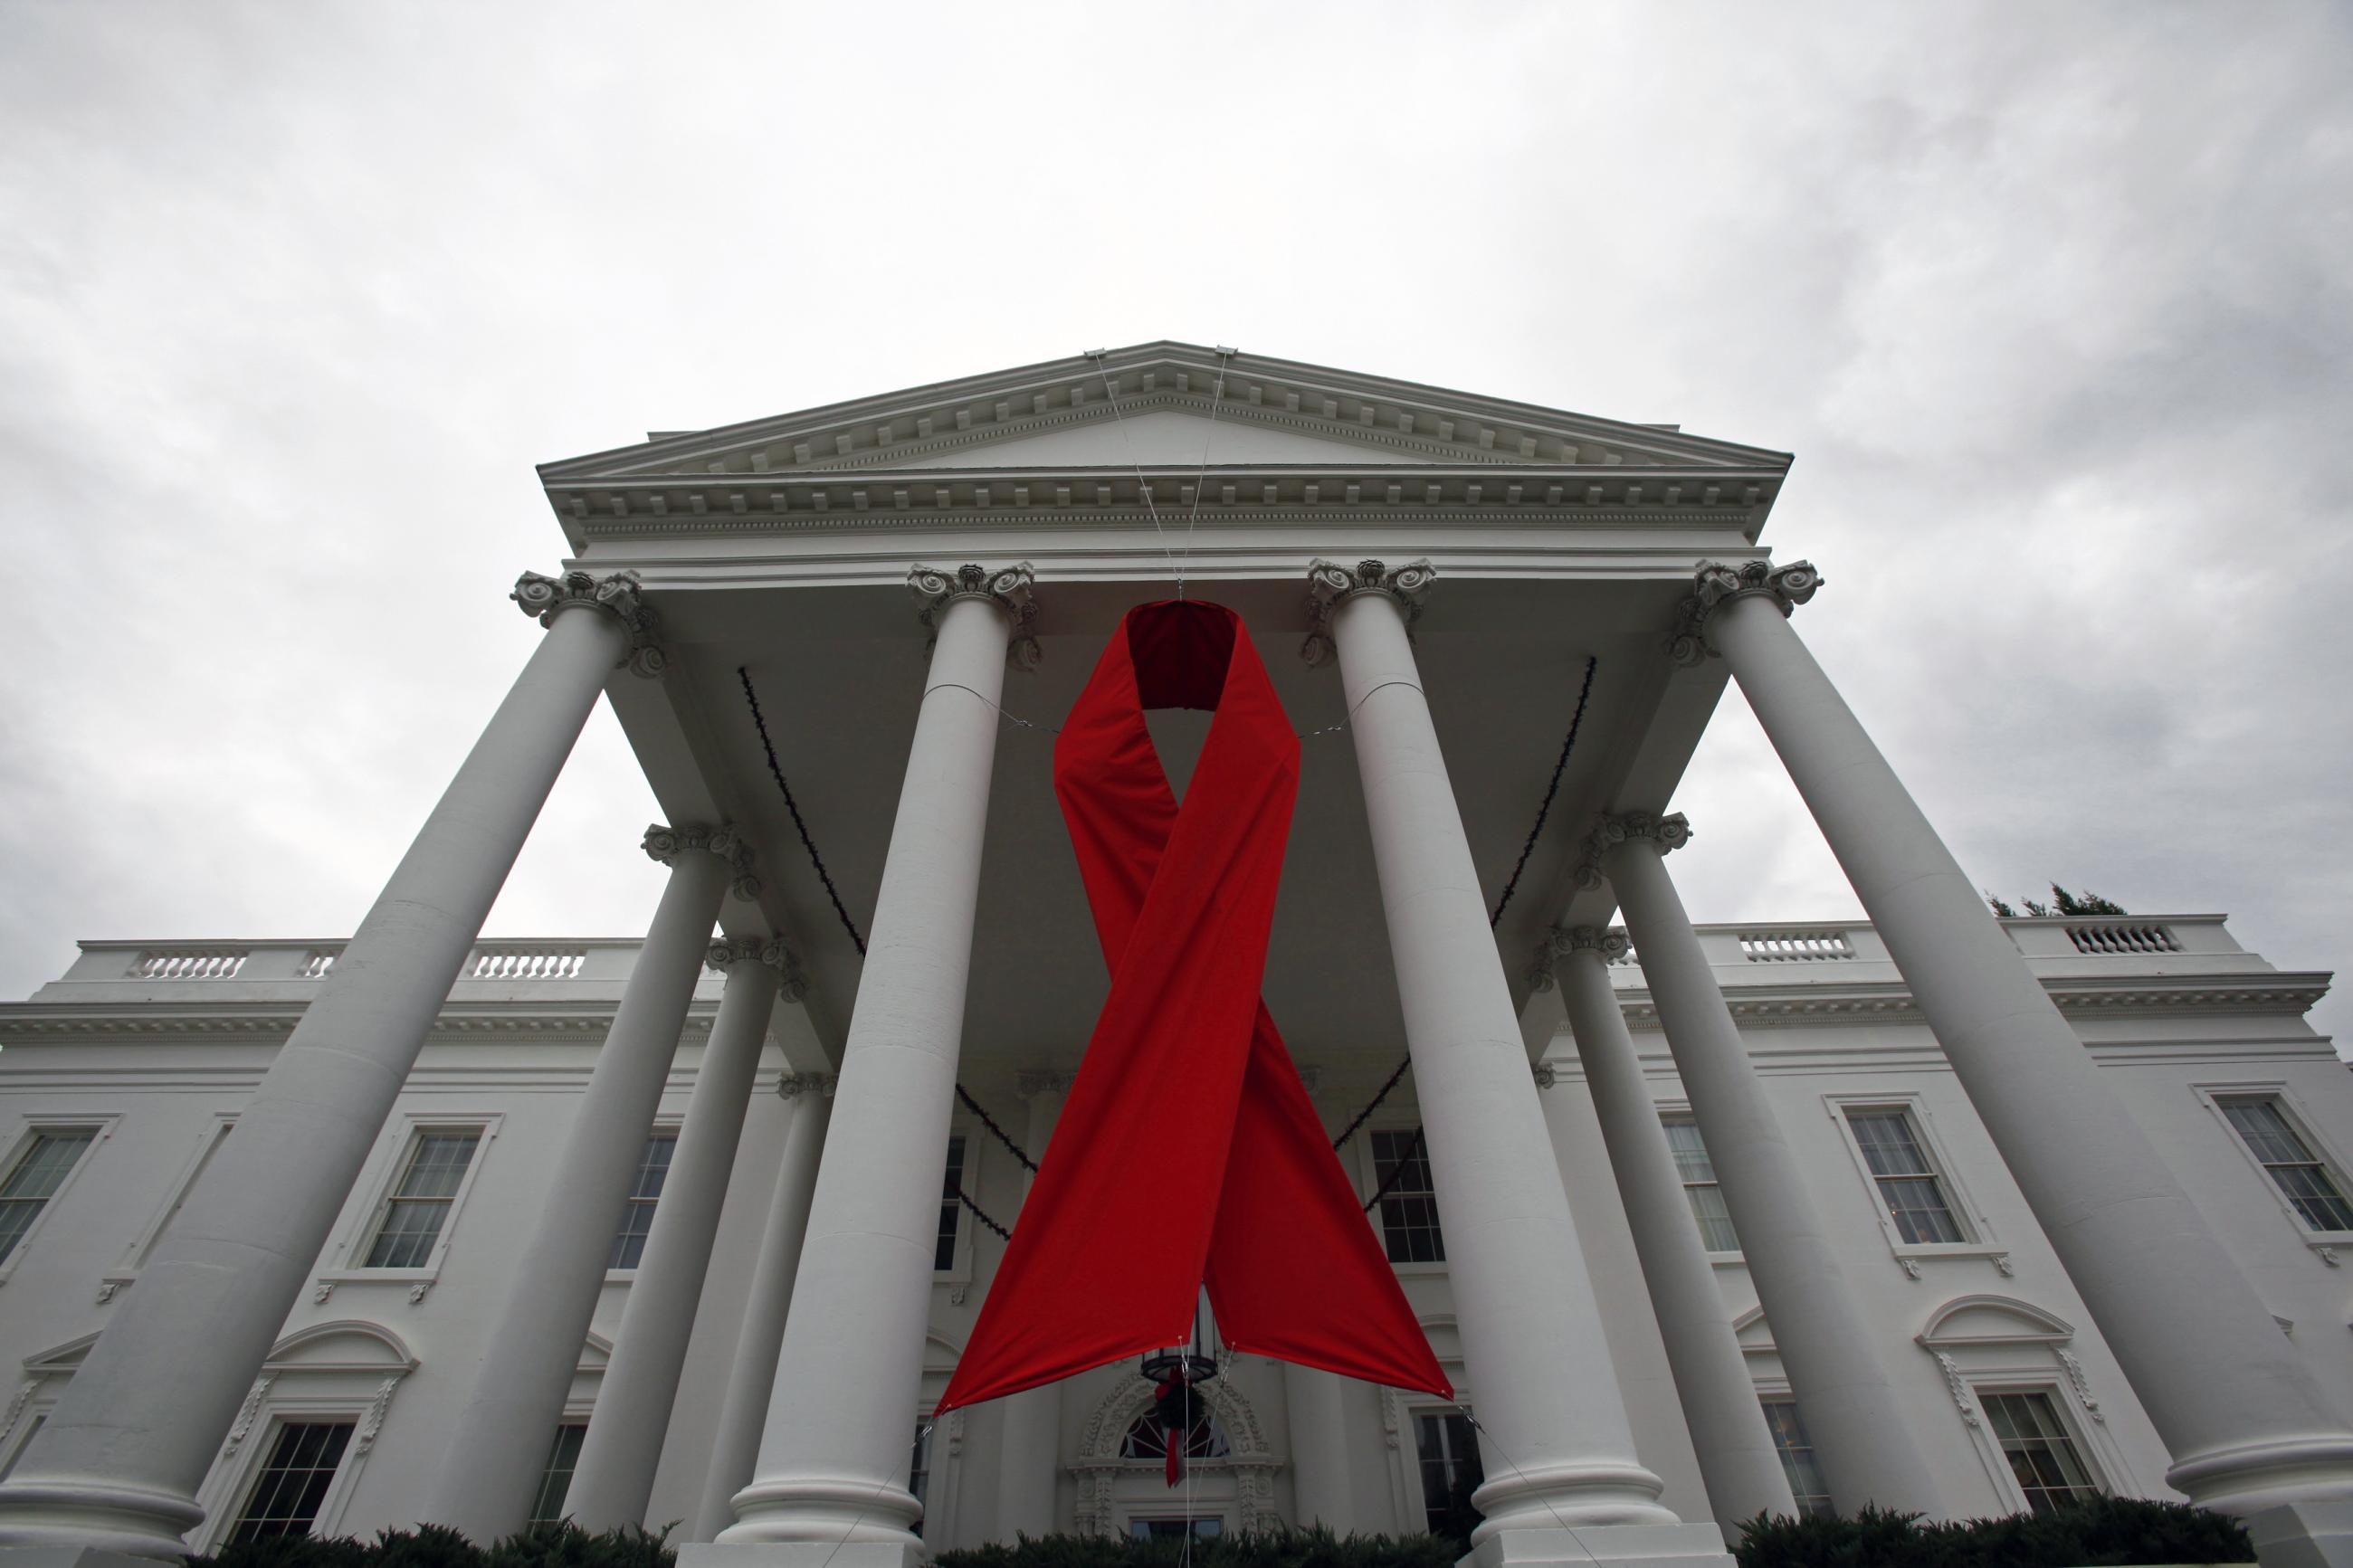 An AIDS ribbon hangs from the North Portico of the White House.